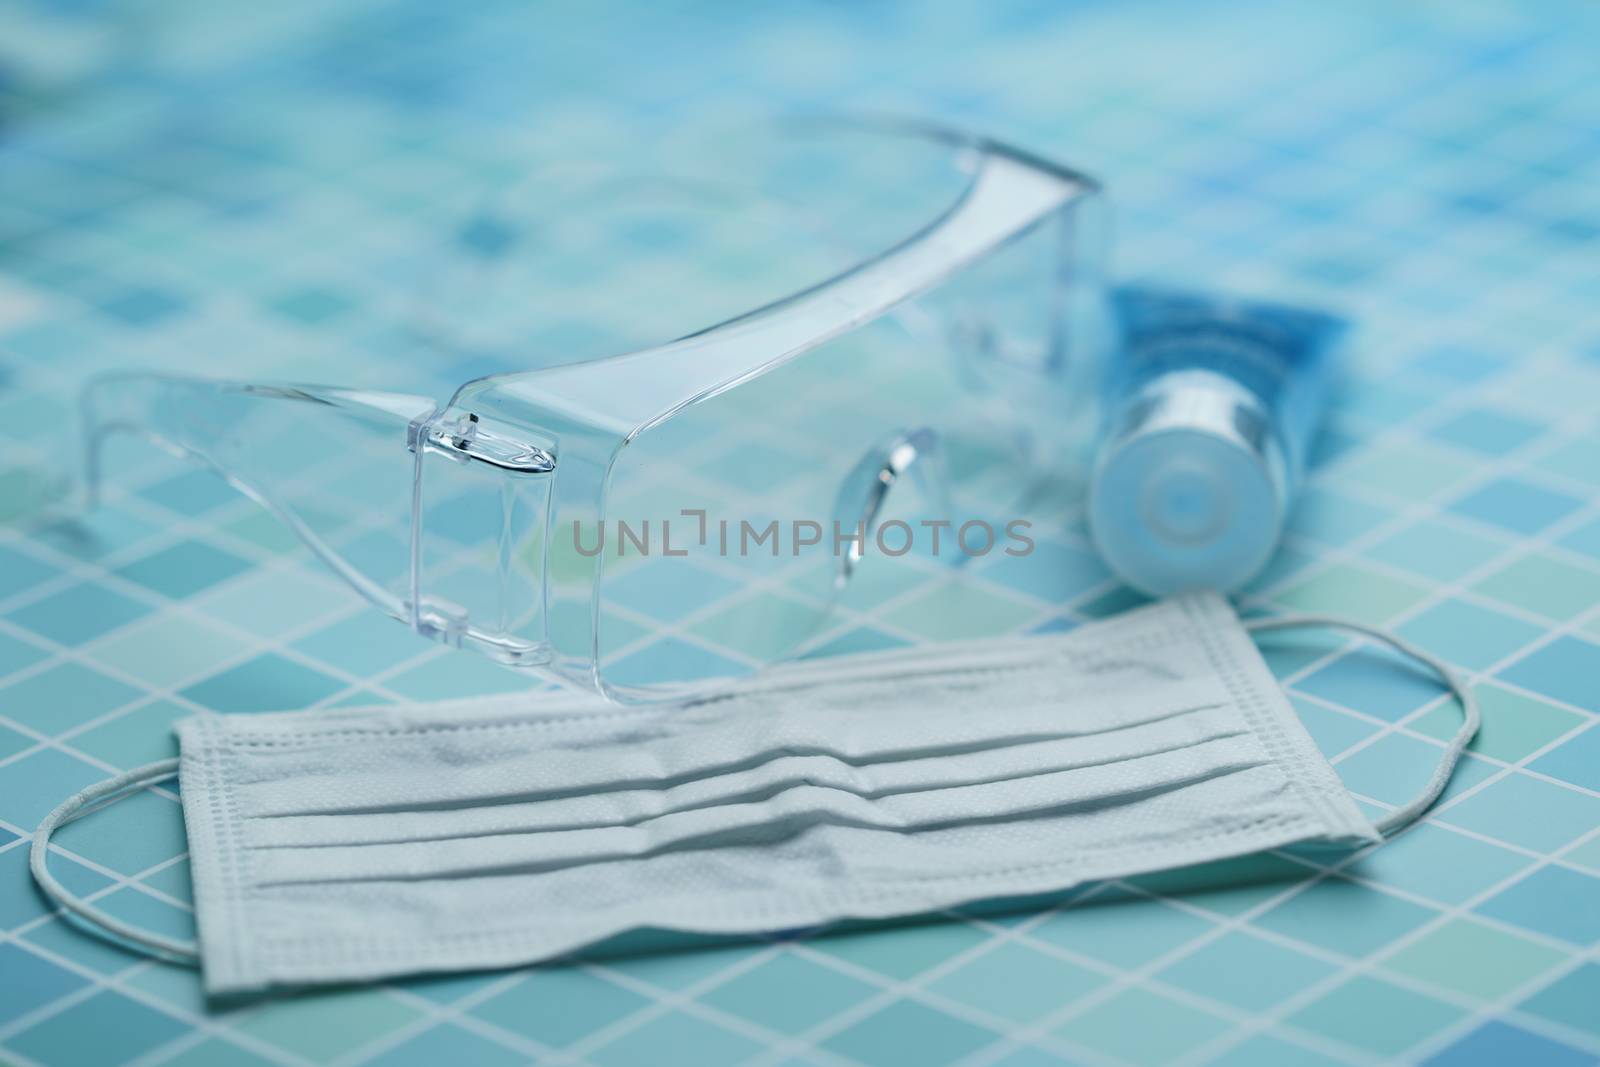 Must have items - protective face mask, glasses and sanitizer g by sirawit99